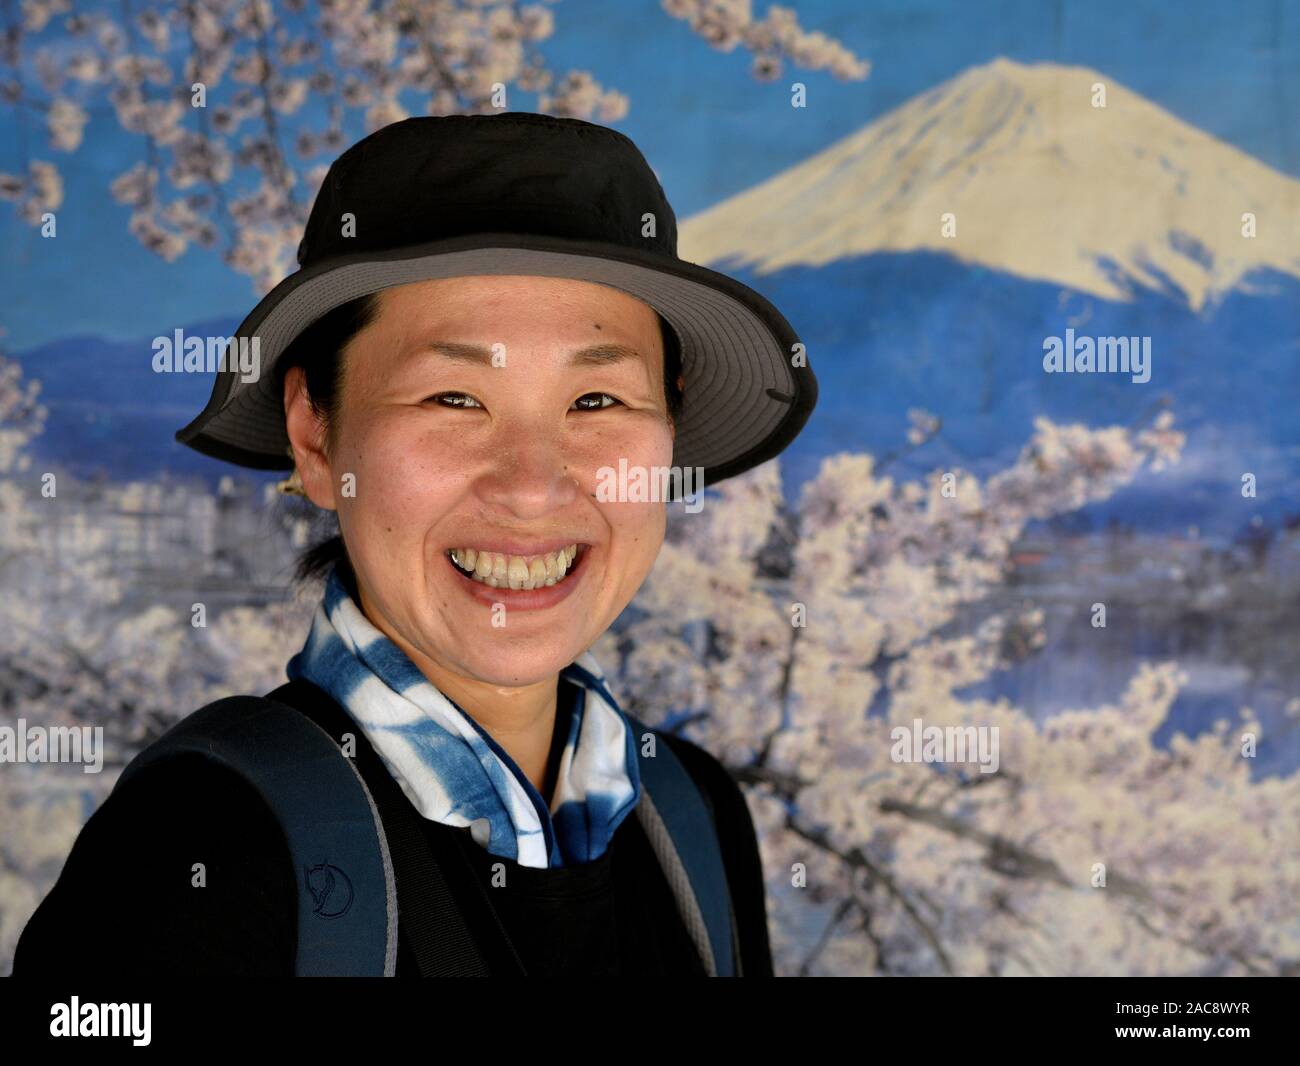 Japanese tourist smiles for the camera in front of an old Japanese tourism poster of Mount Fuji with cherry blossoms. Stock Photo